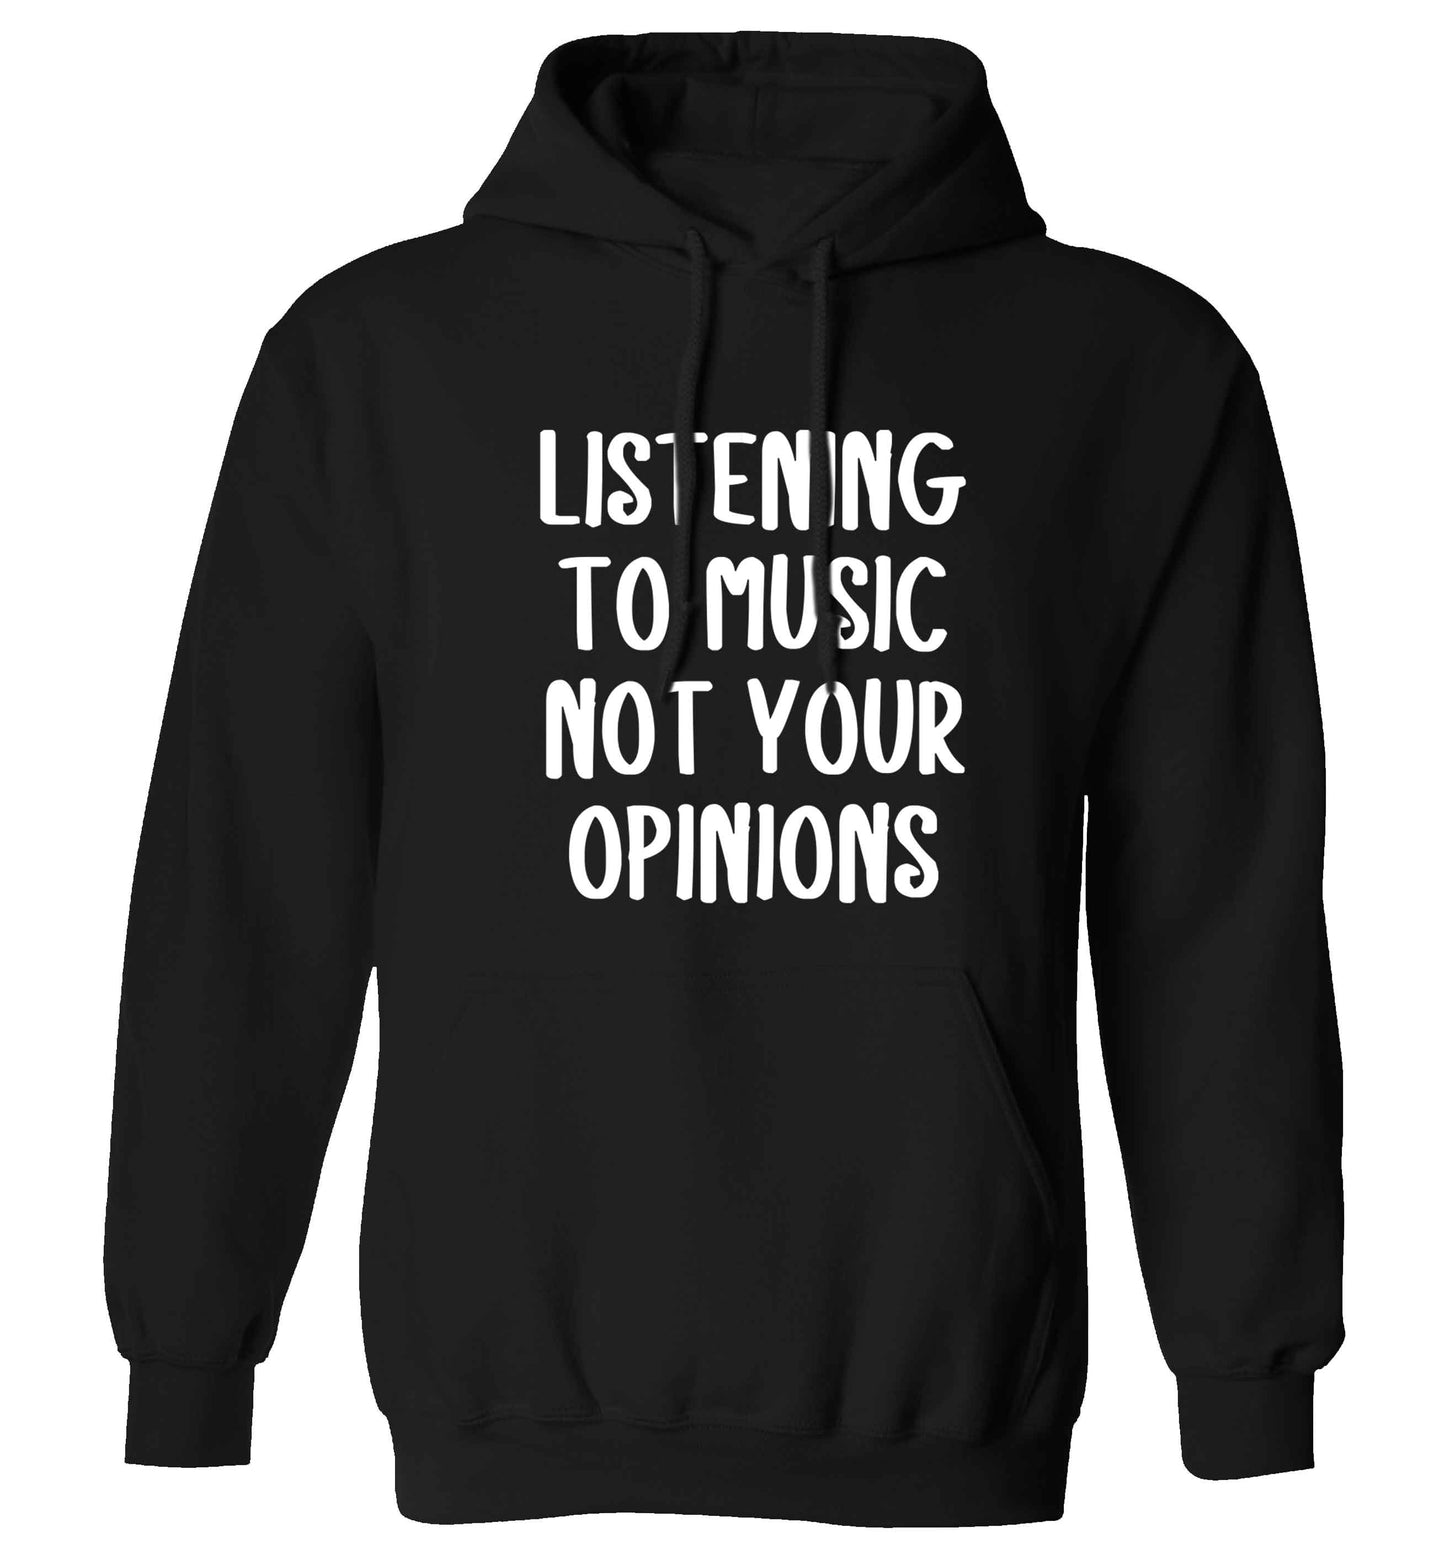 Listening to music not your opinions adults unisex black hoodie 2XL